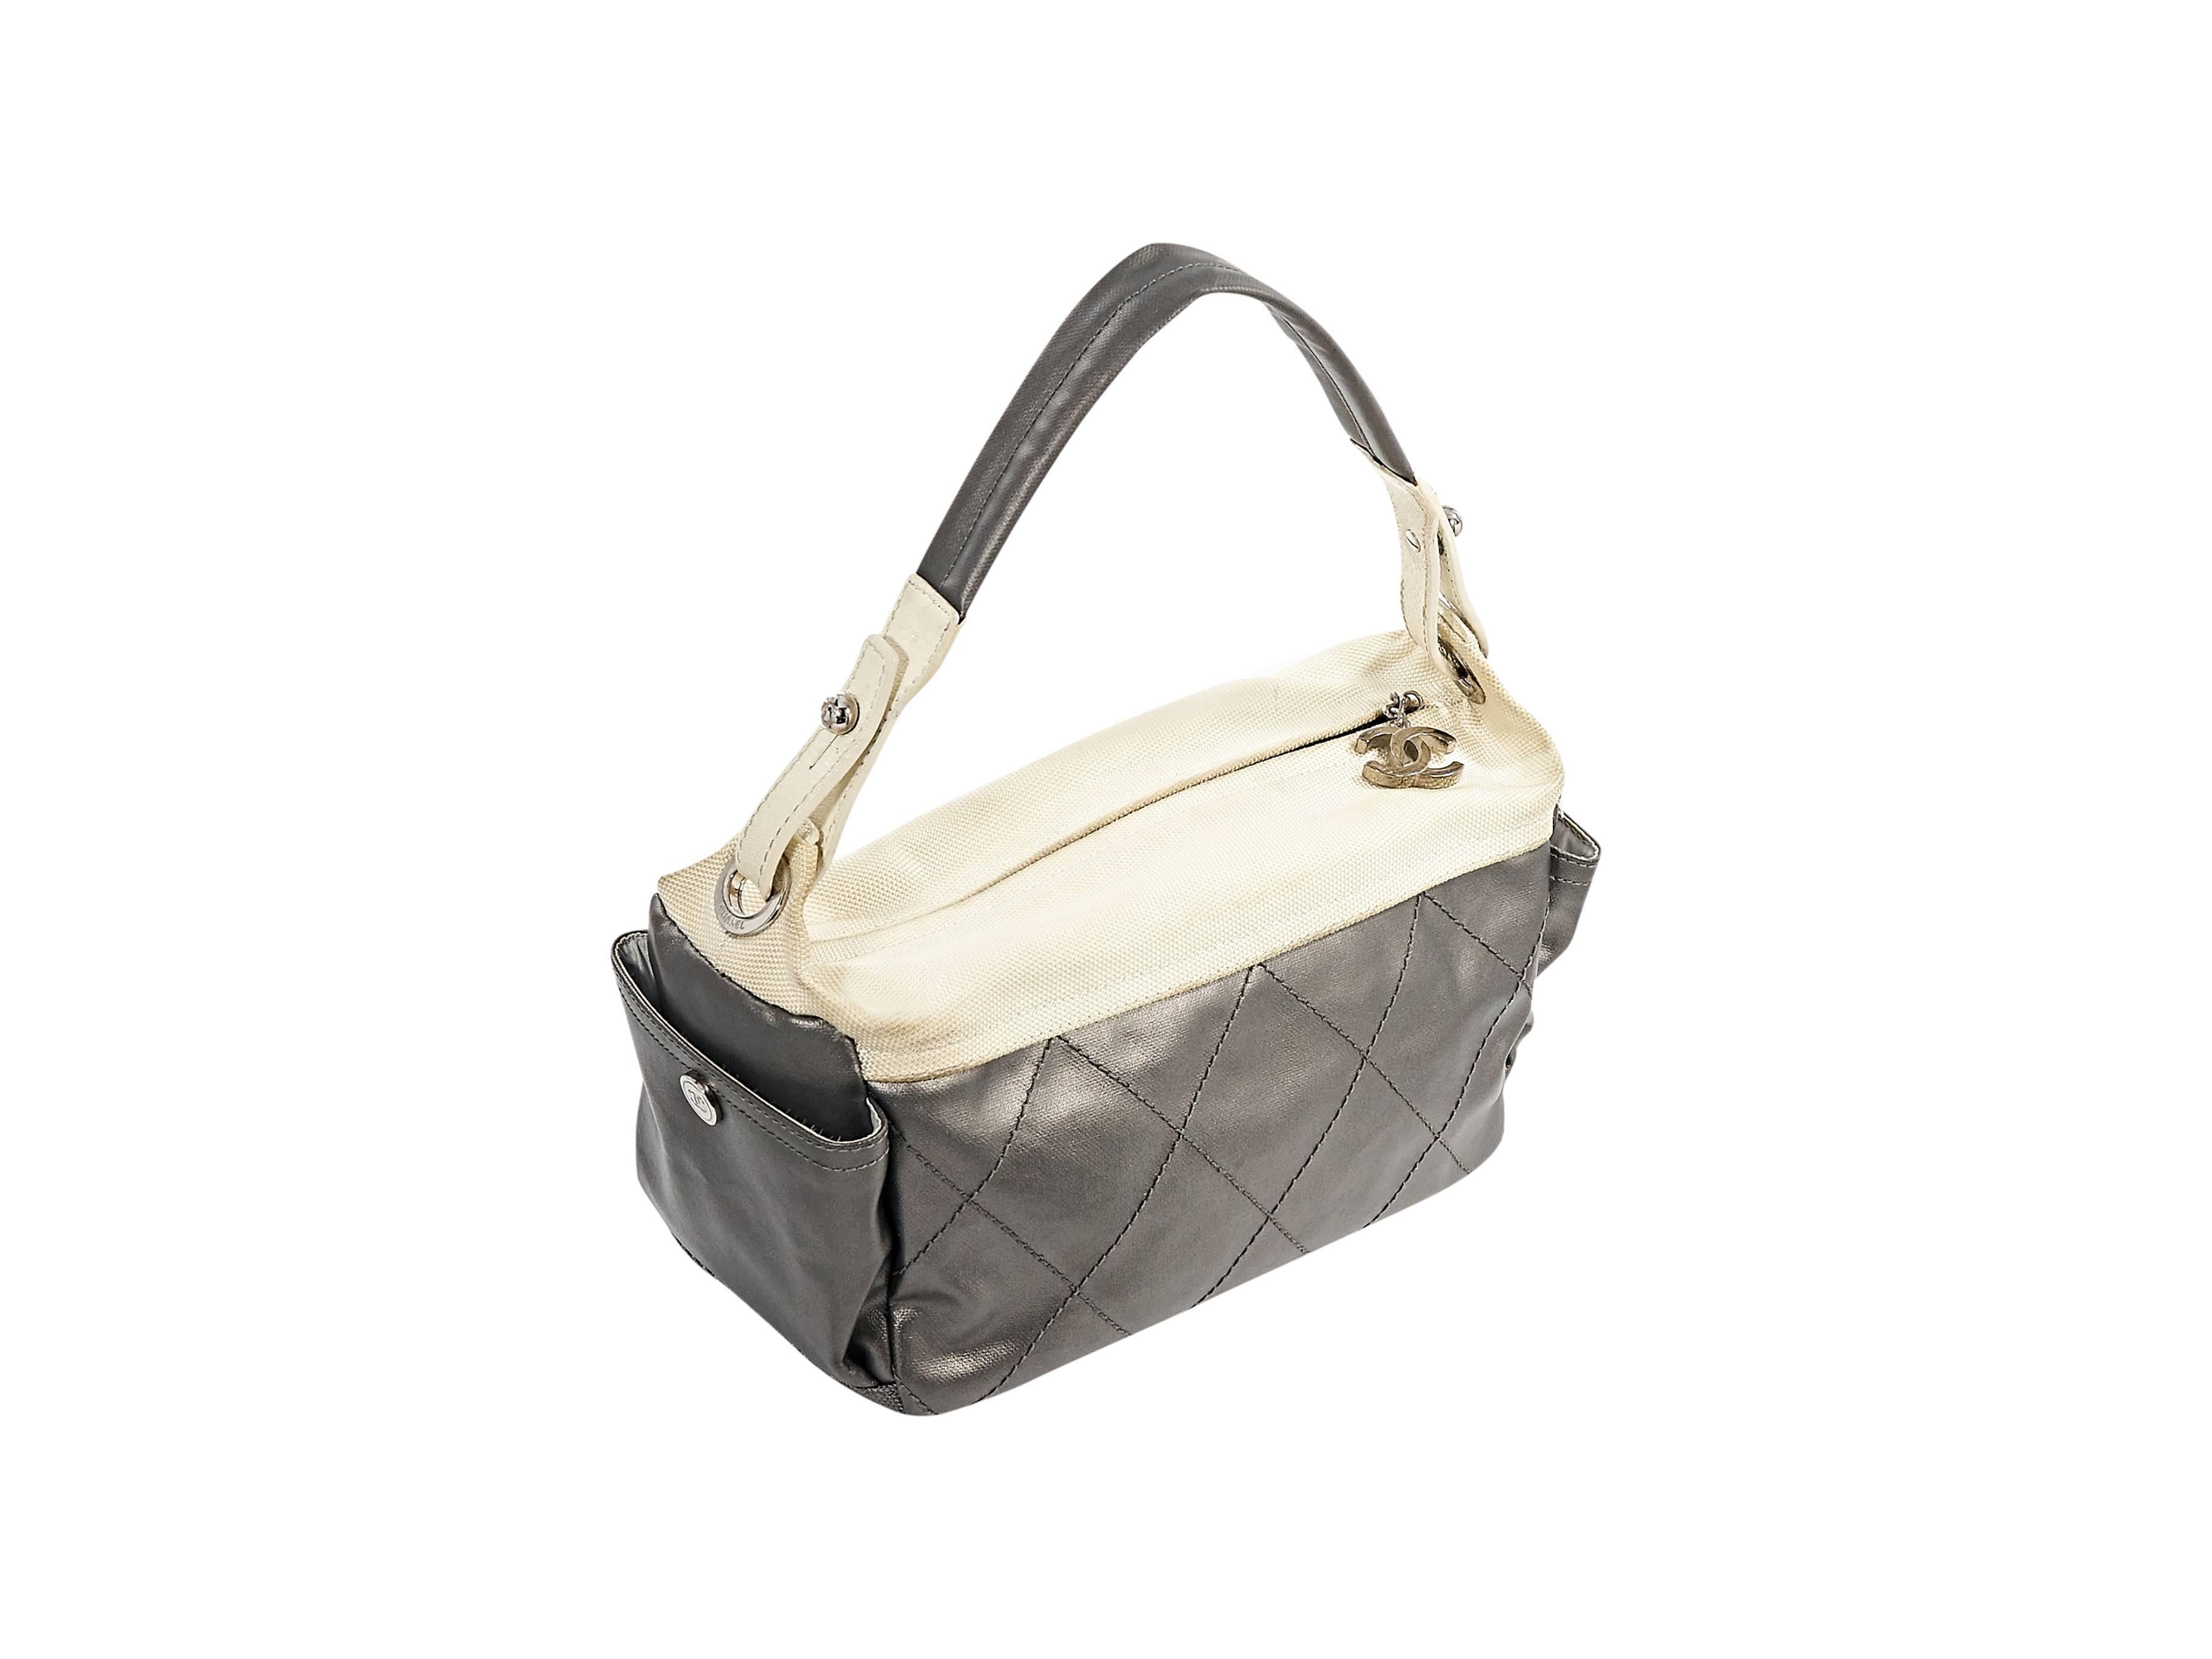 Product details: Grey quilted leather shoulder bag by Chanel. Cream canvas trim. Single shoulder strap. Top zip closure. Side pockets. Lined interior with inner zip pocket and strap. Protective metal feet. Silvertone hardware. 12